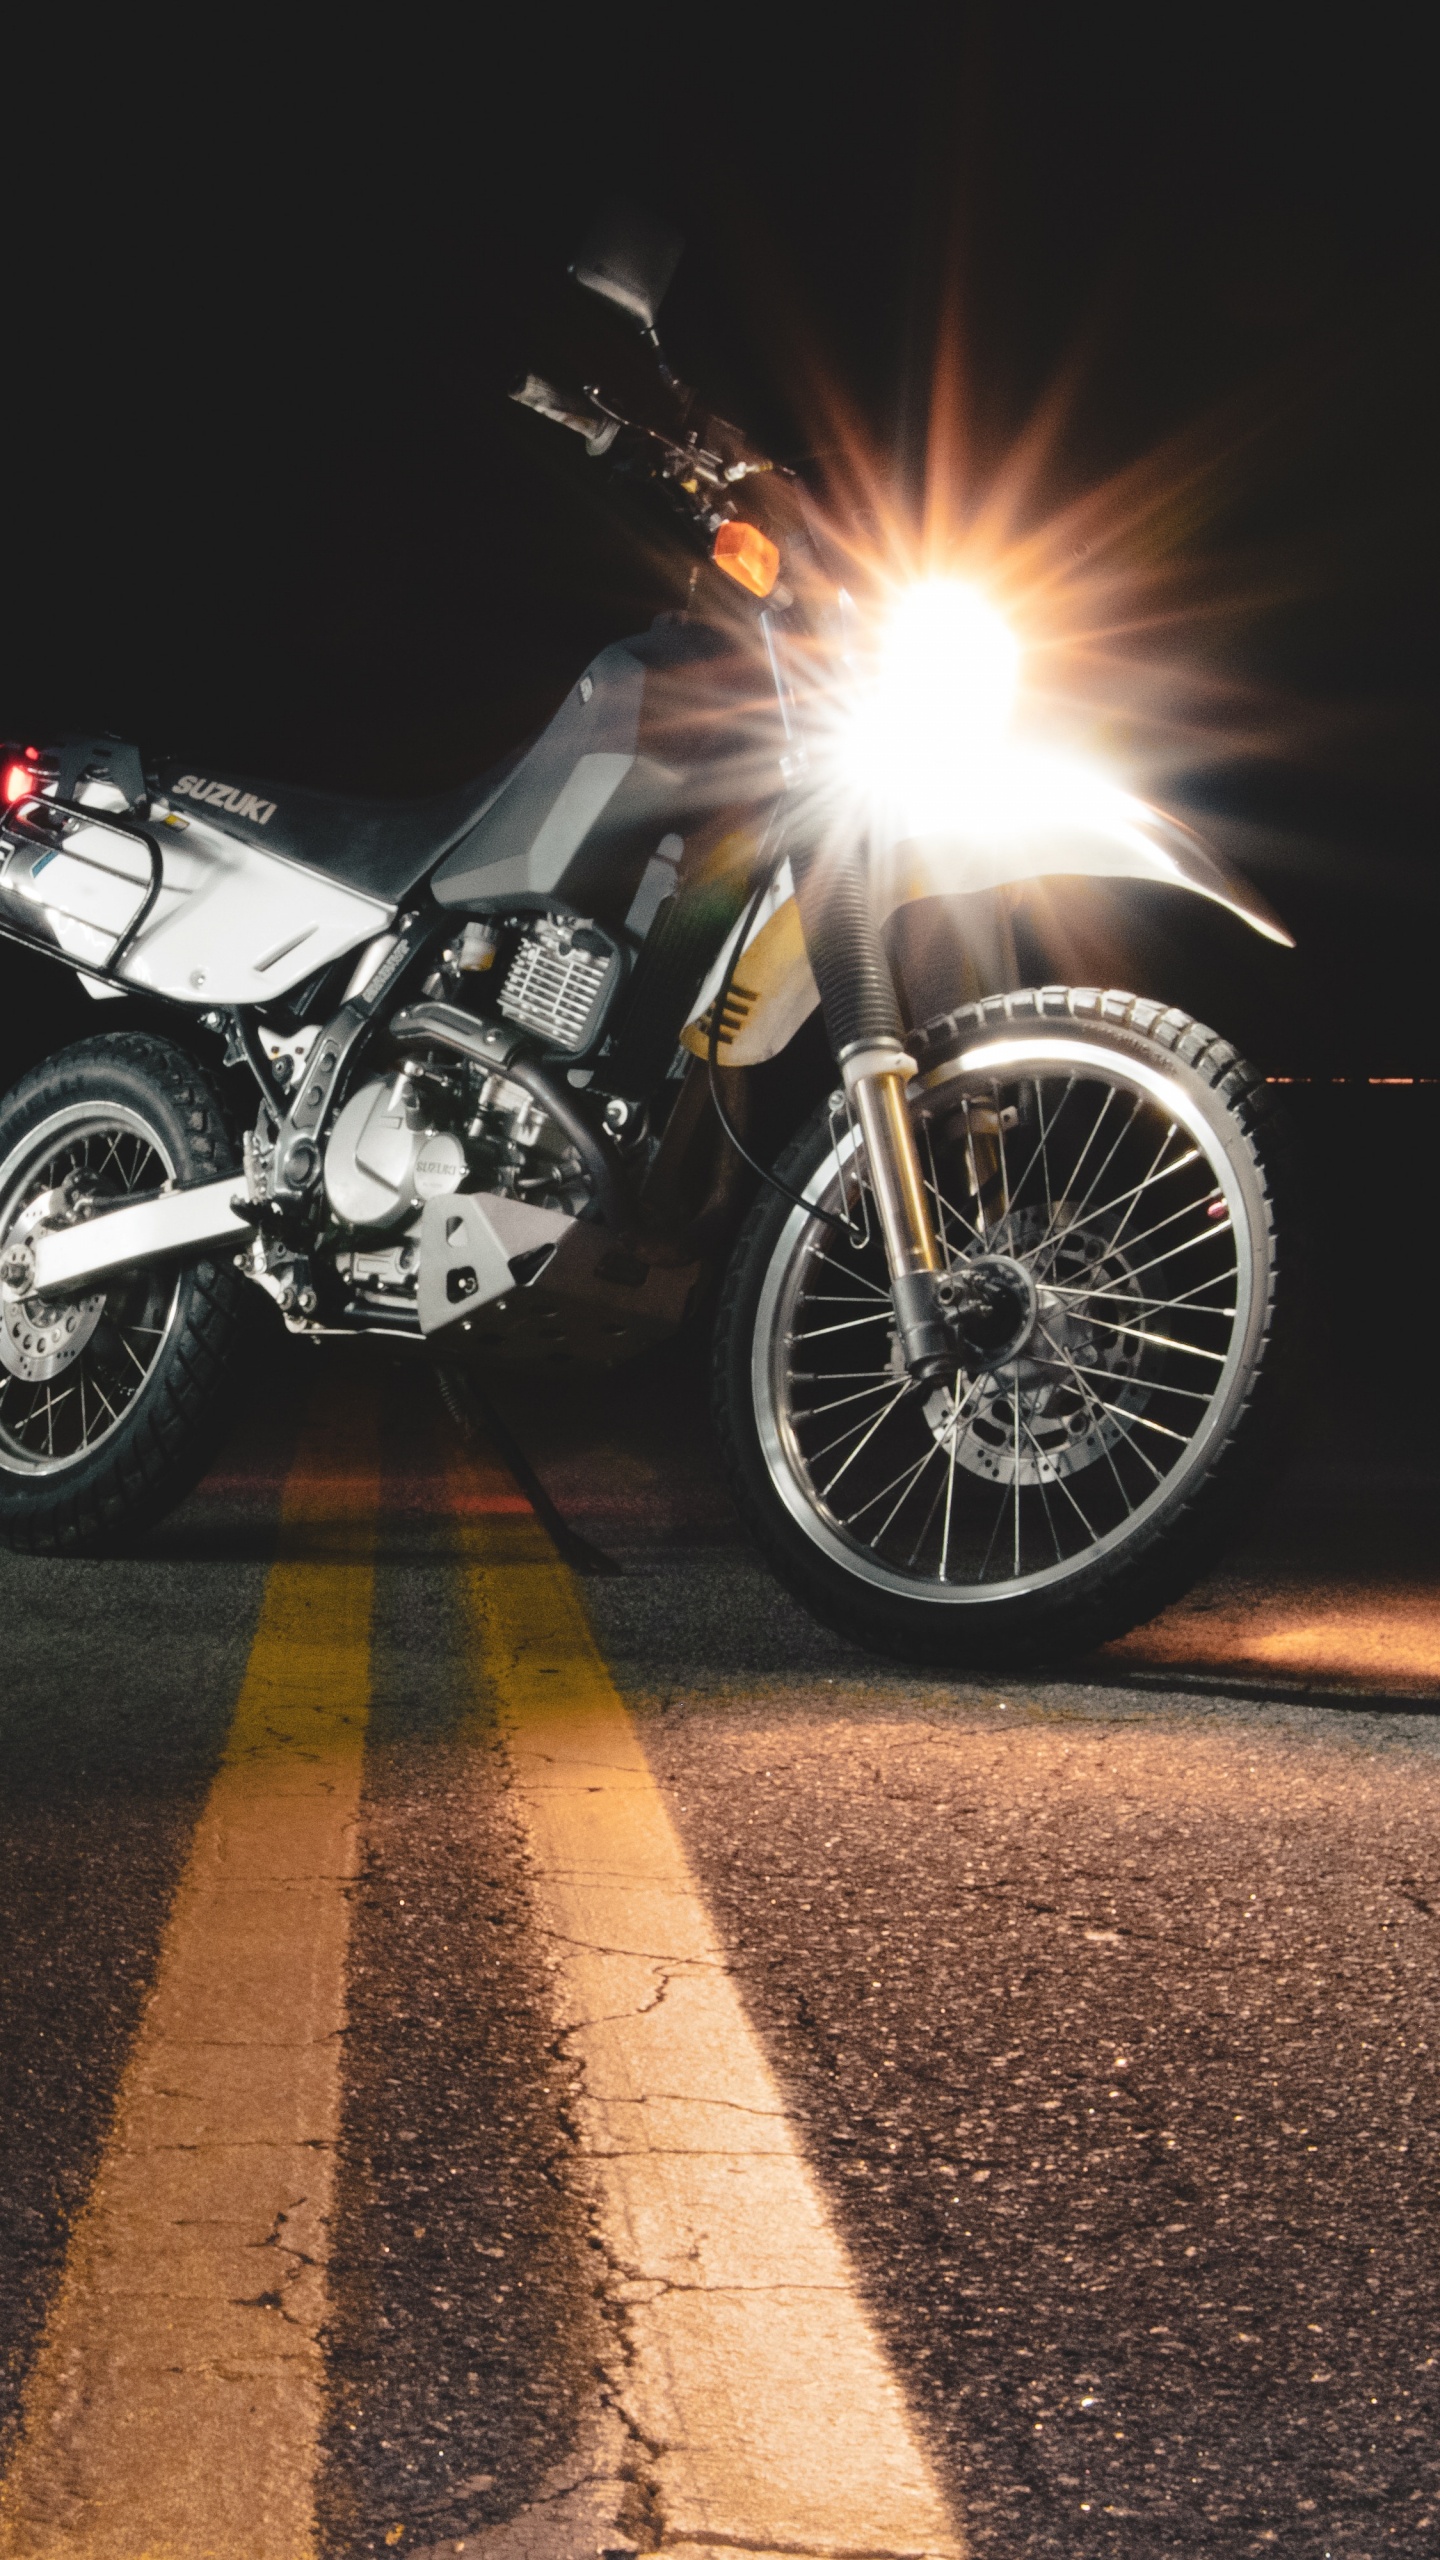 Black and Silver Motorcycle on Road During Night Time. Wallpaper in 1440x2560 Resolution